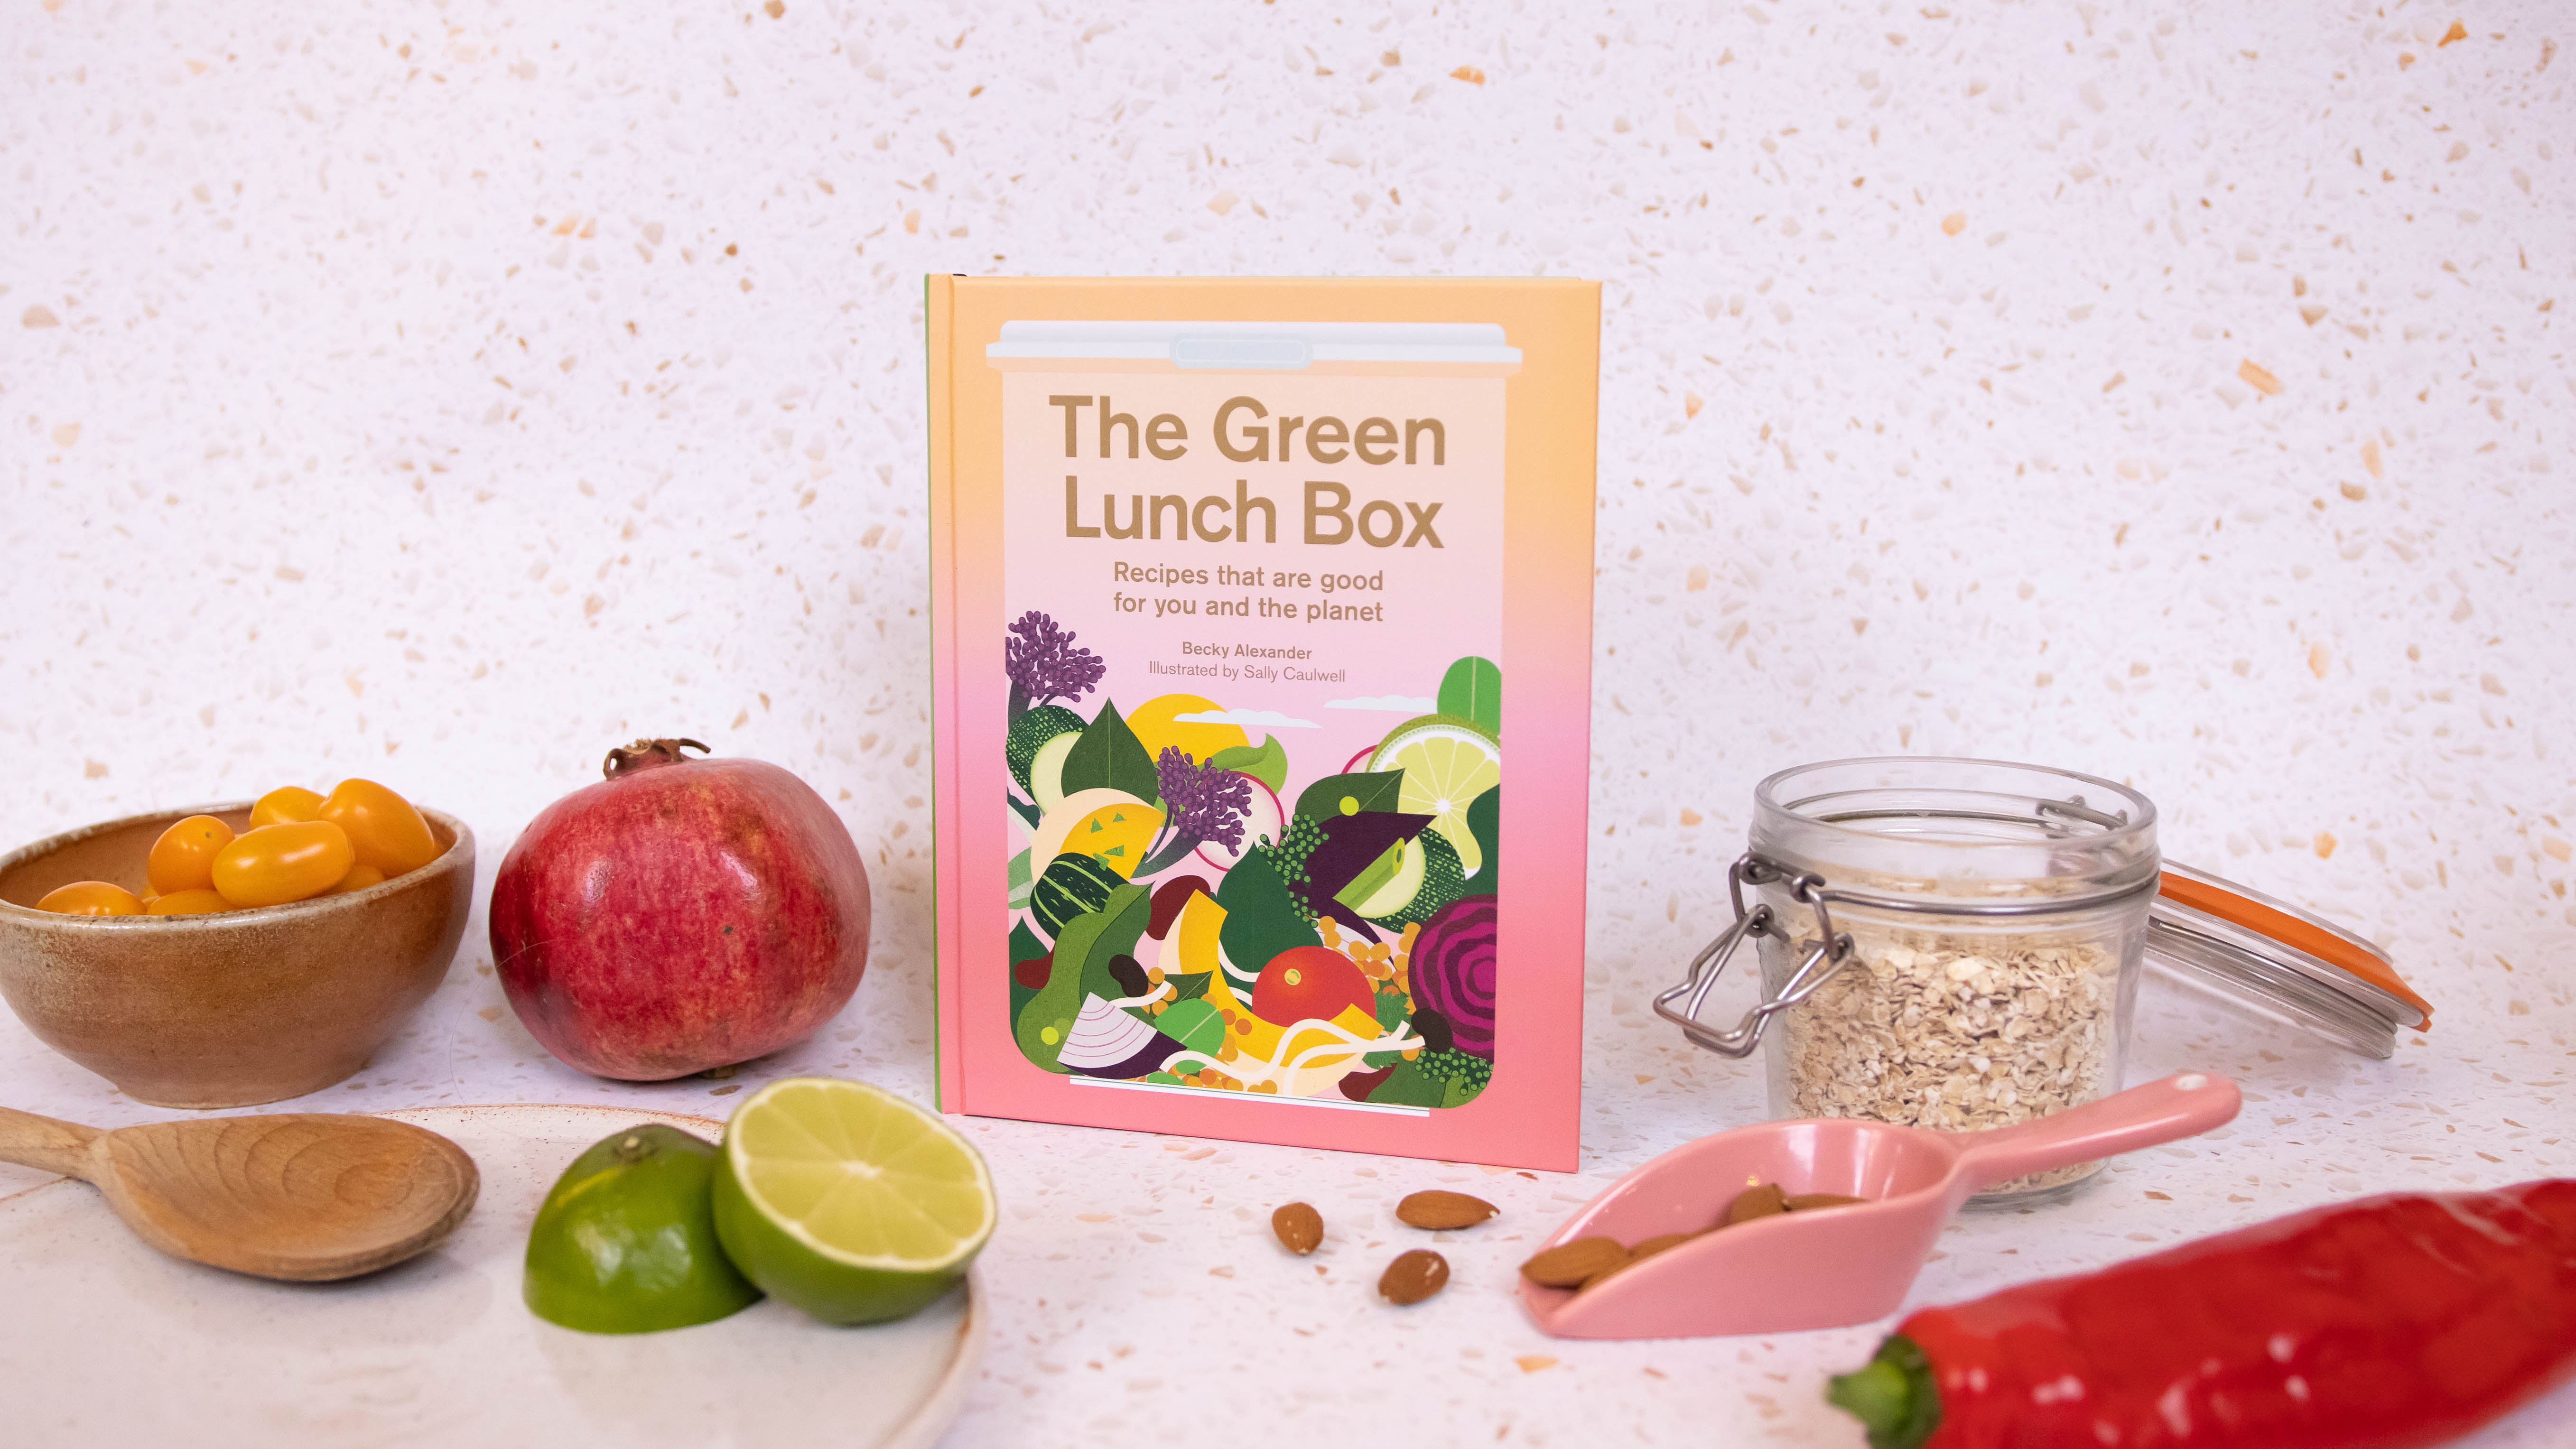 The Green Lunch Box